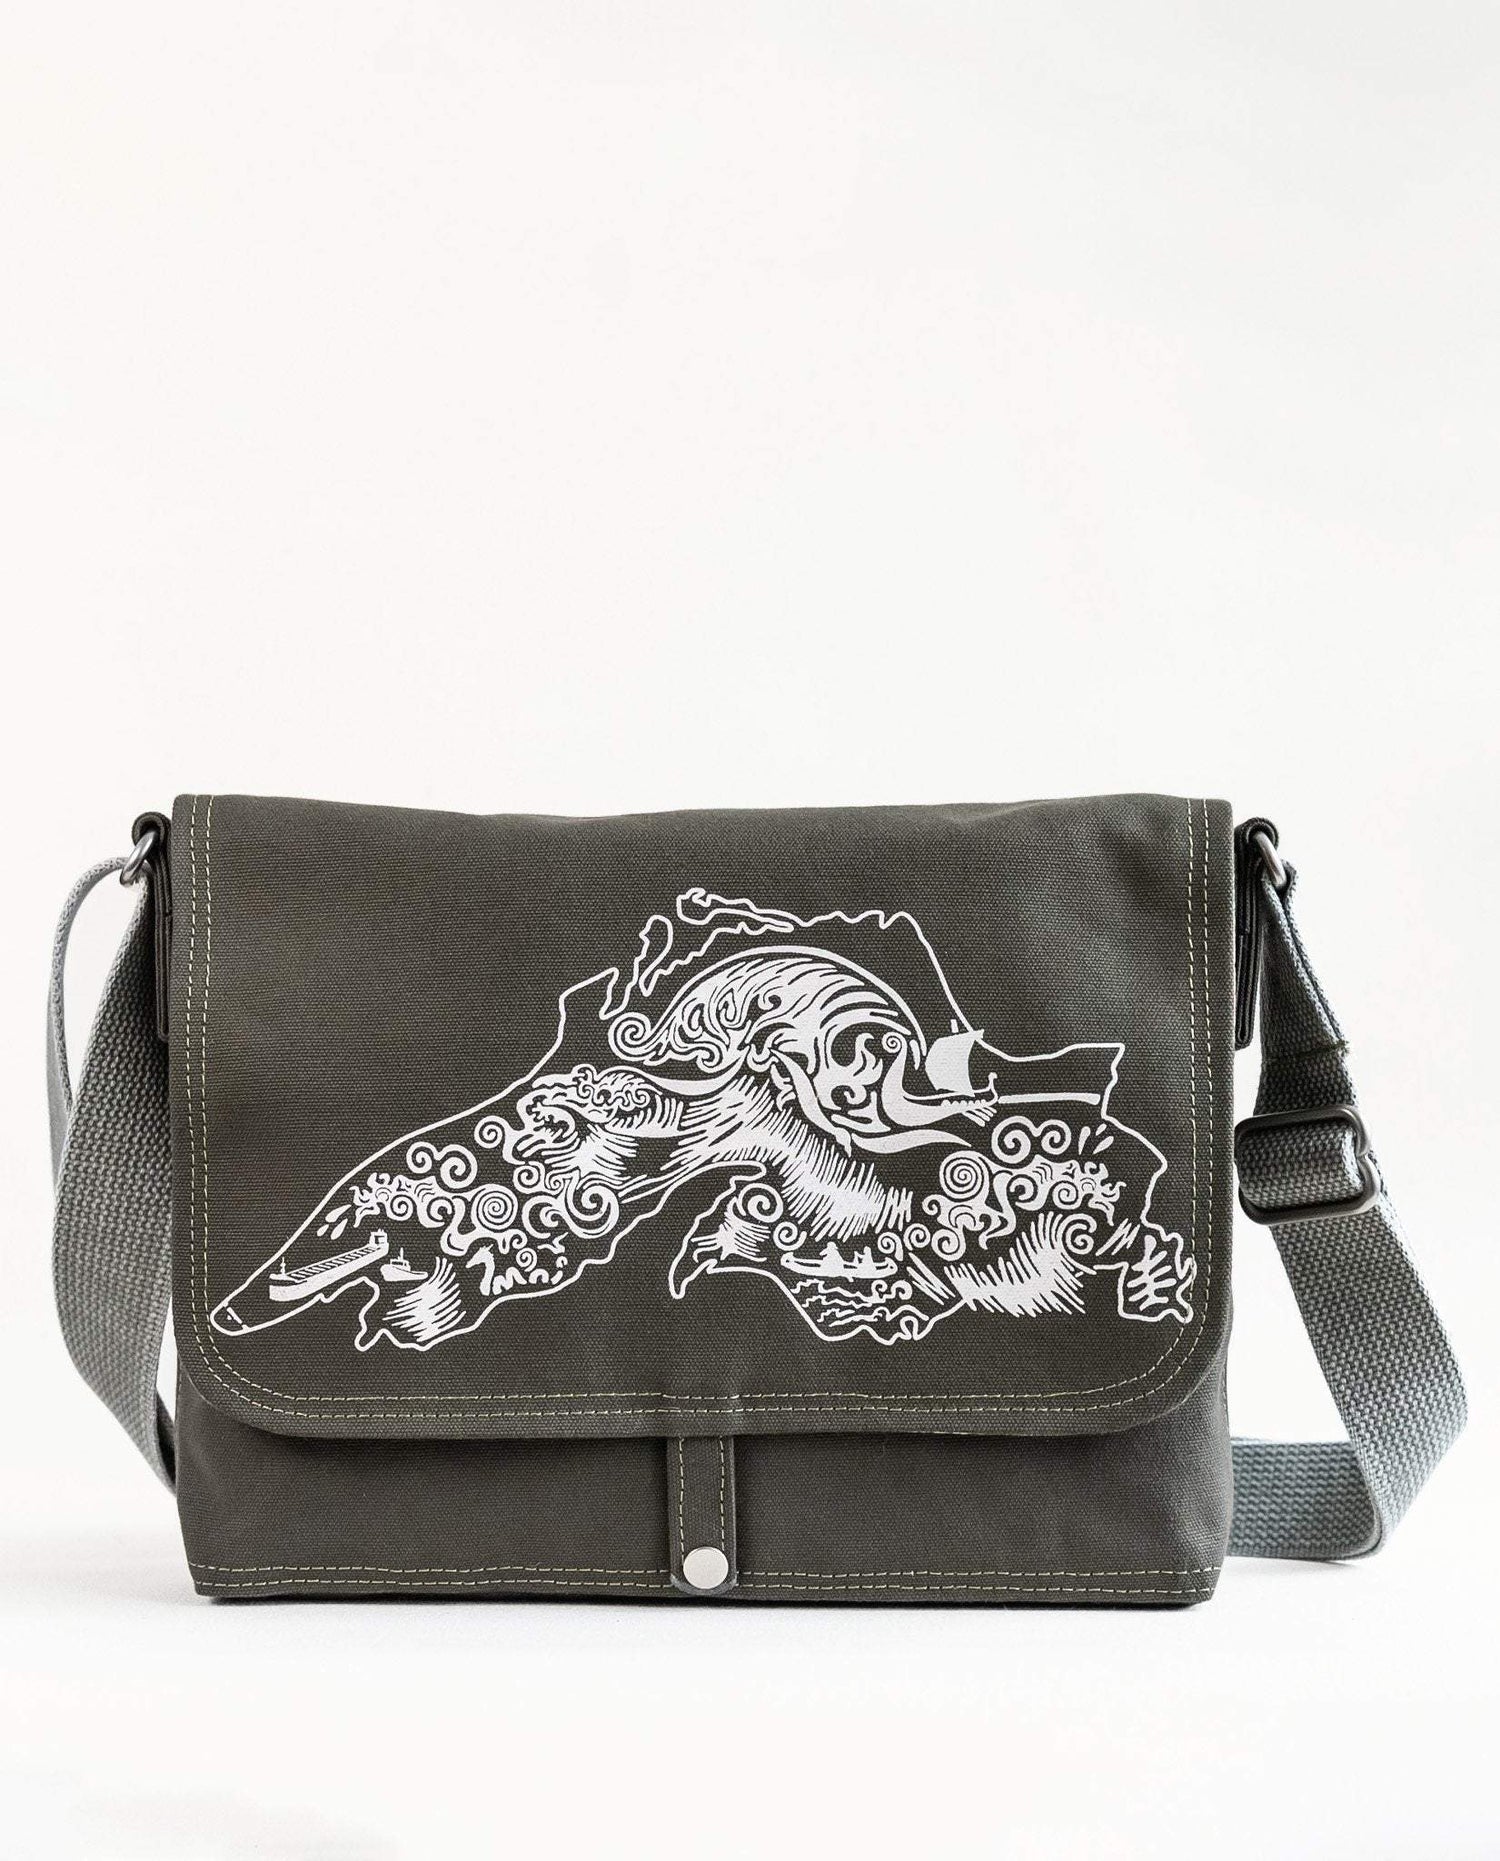 Front exterior of Dock 5’s Lake Superior Canvas Messenger Bag in olive featuring art from owner Natalija Walbridge